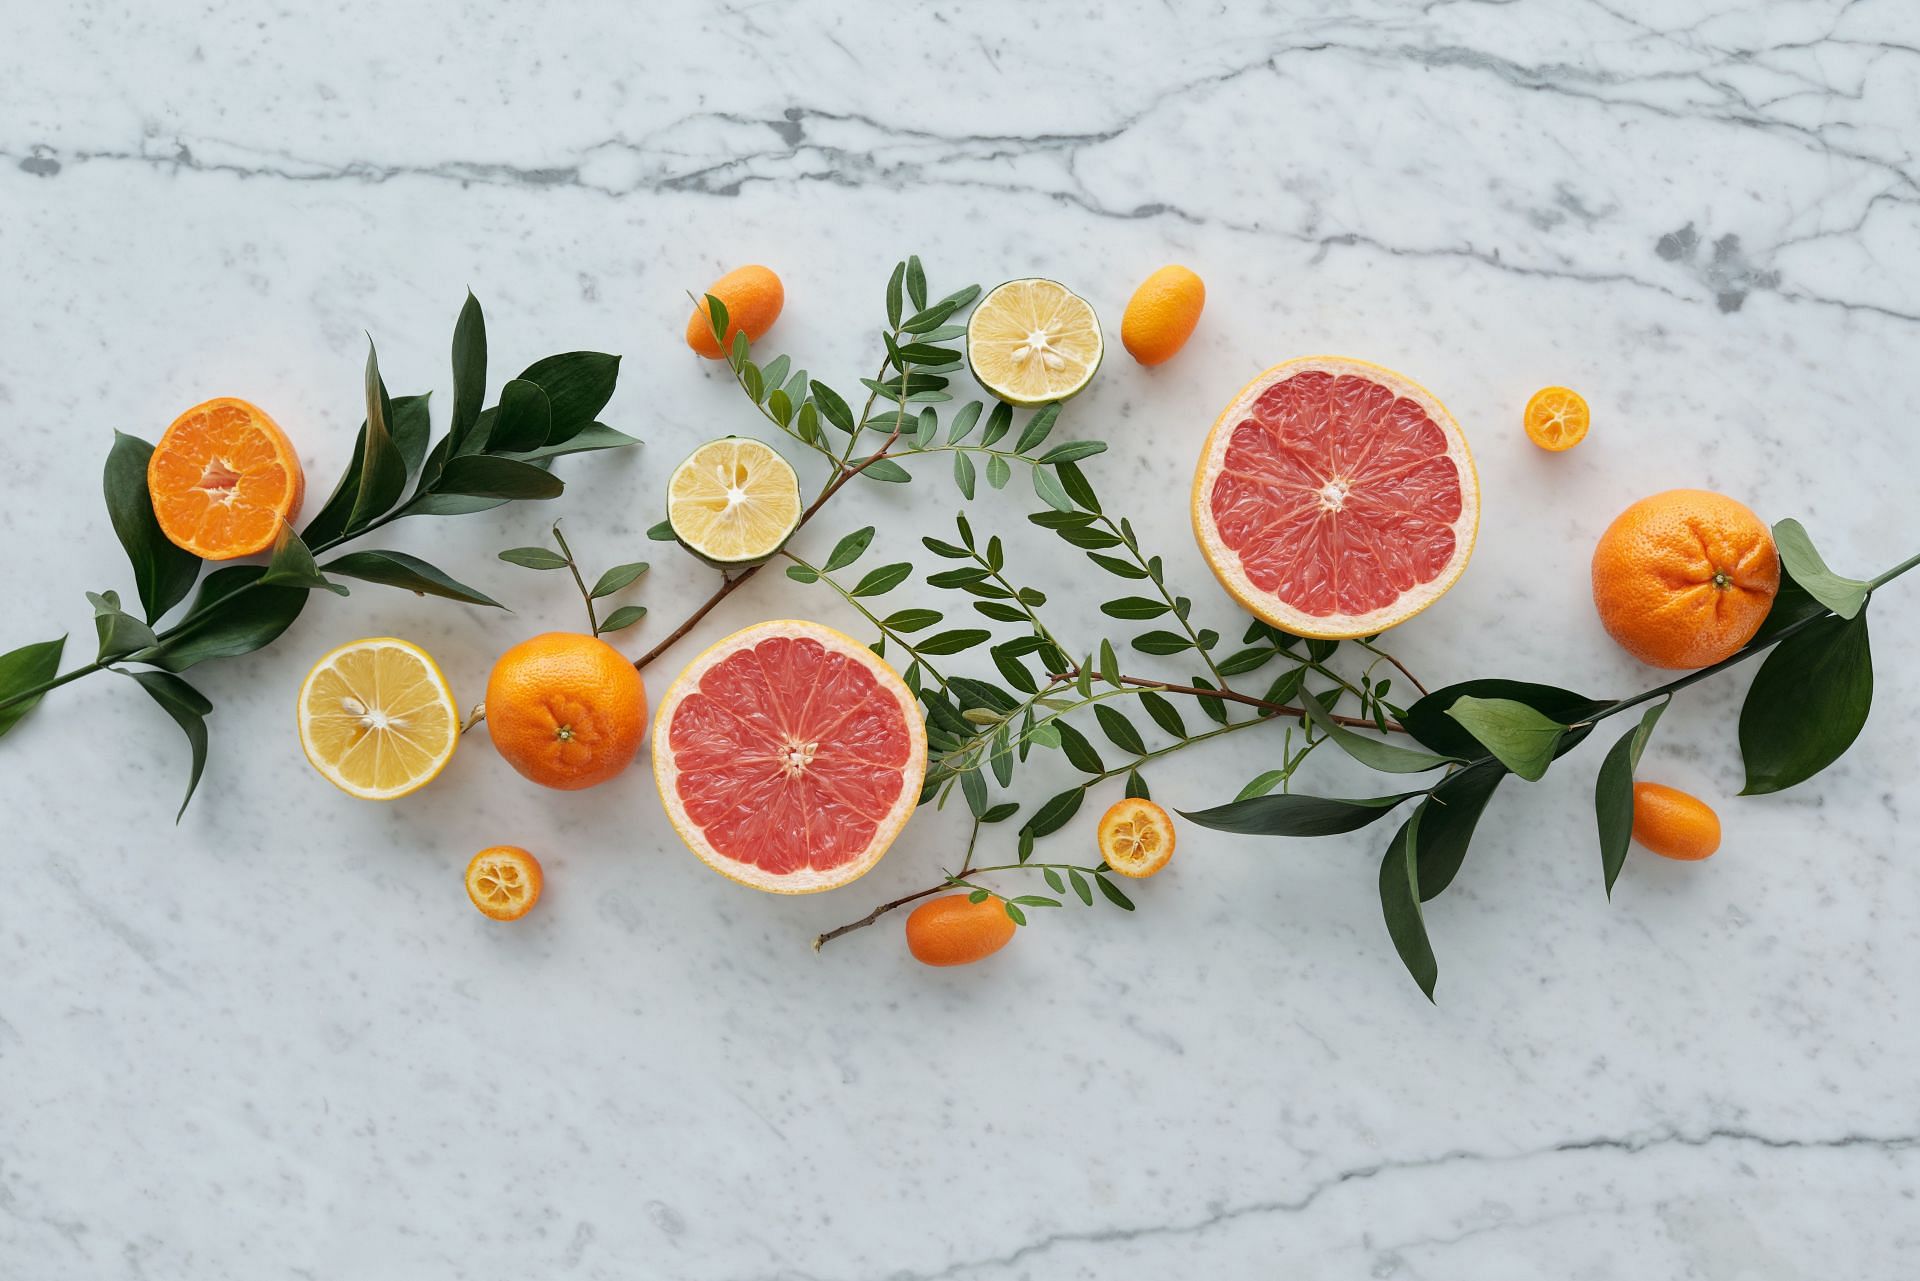 The fragrance of certain citrus fruits and herbs can help alleviate nausea (Image via Pexels @Vanessa Loring)